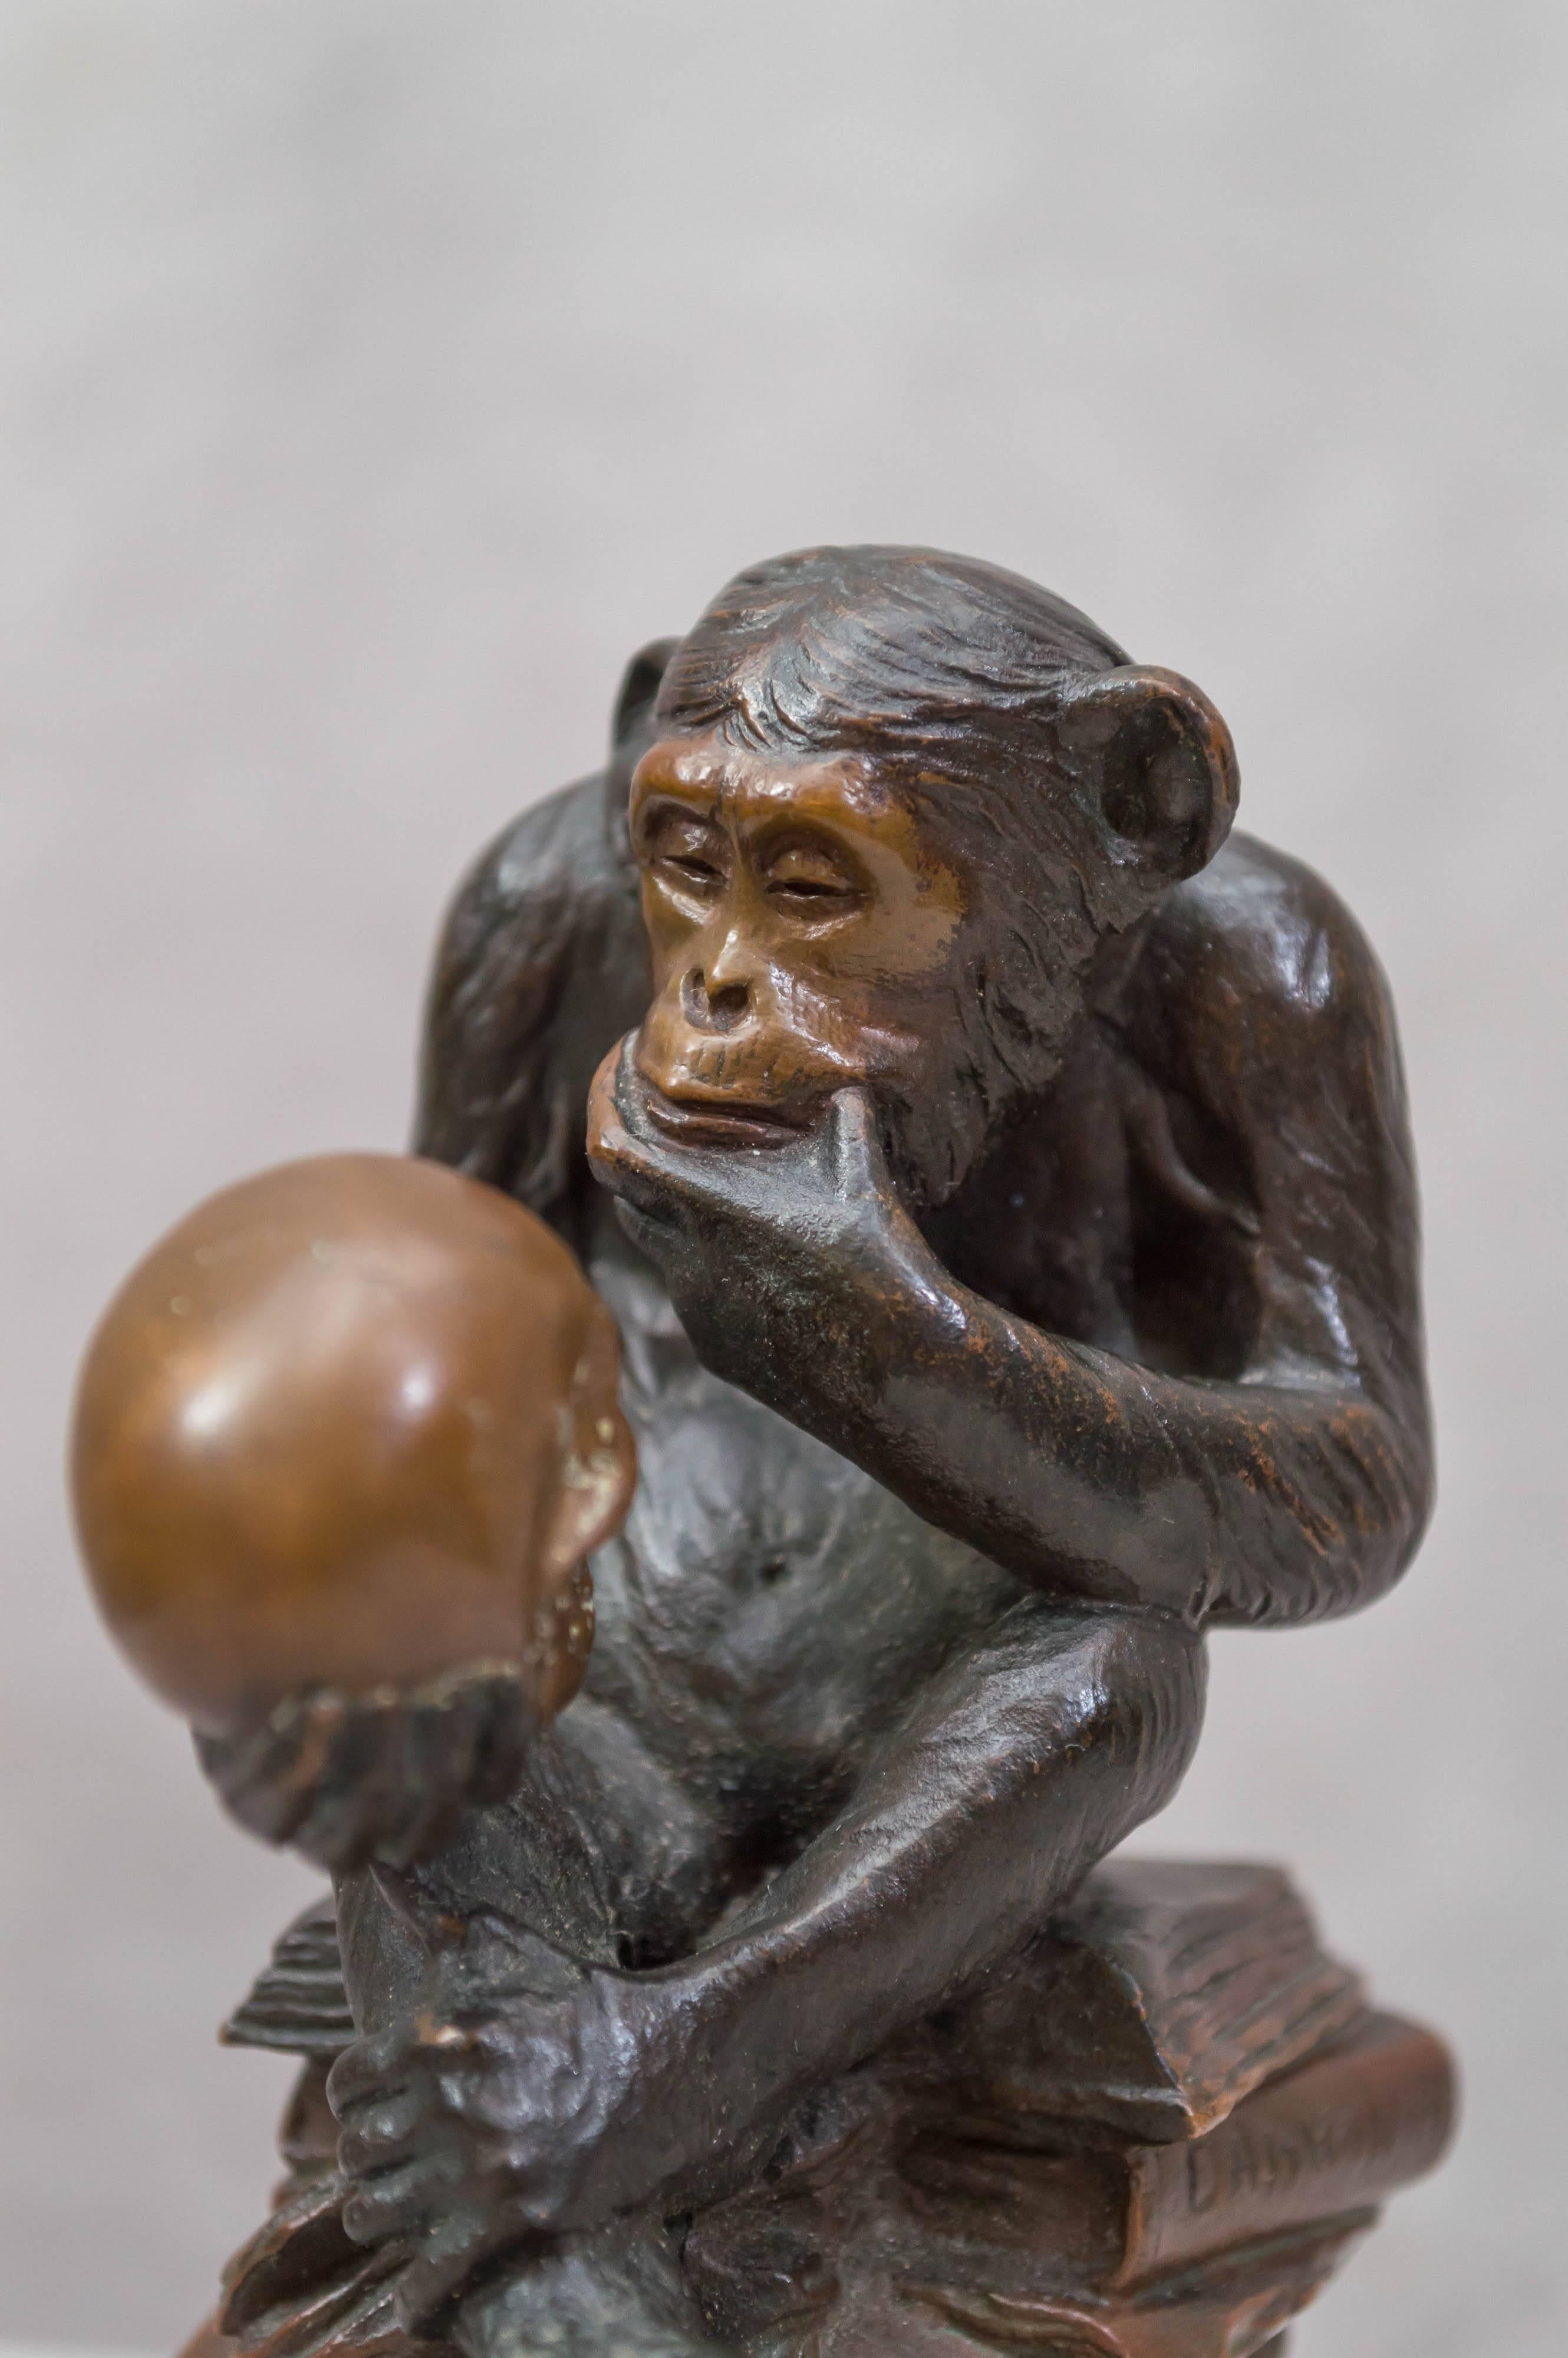 Hand-Crafted Whimsical Bronze Figure of a Monkey Studying a Skull, Darwinian Reference